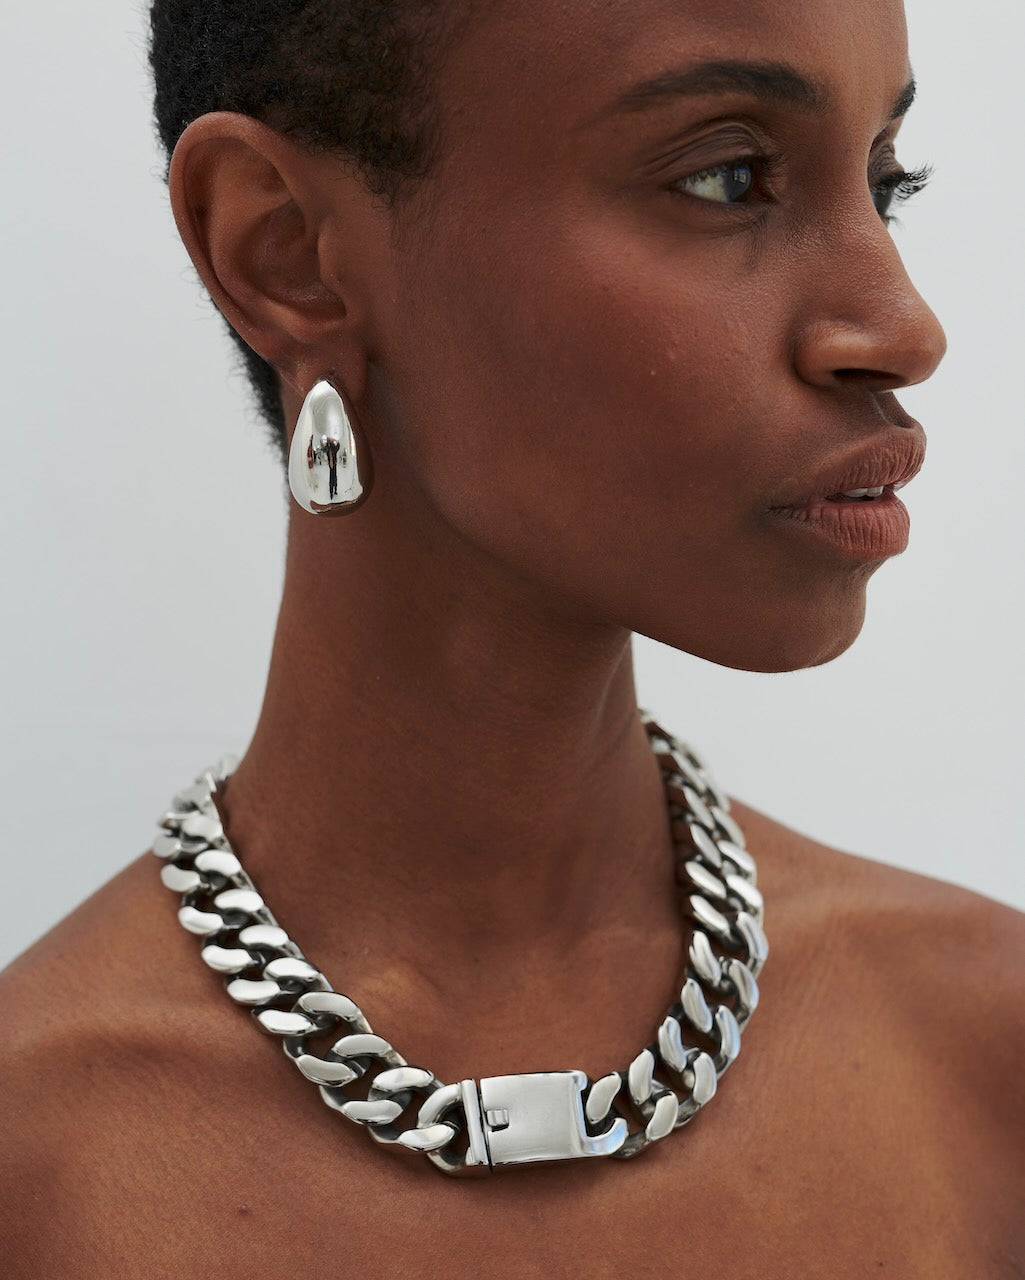 Anna Rossi Traffic Stopper Earring in Gunmetal available at TNT The New Trend Australia